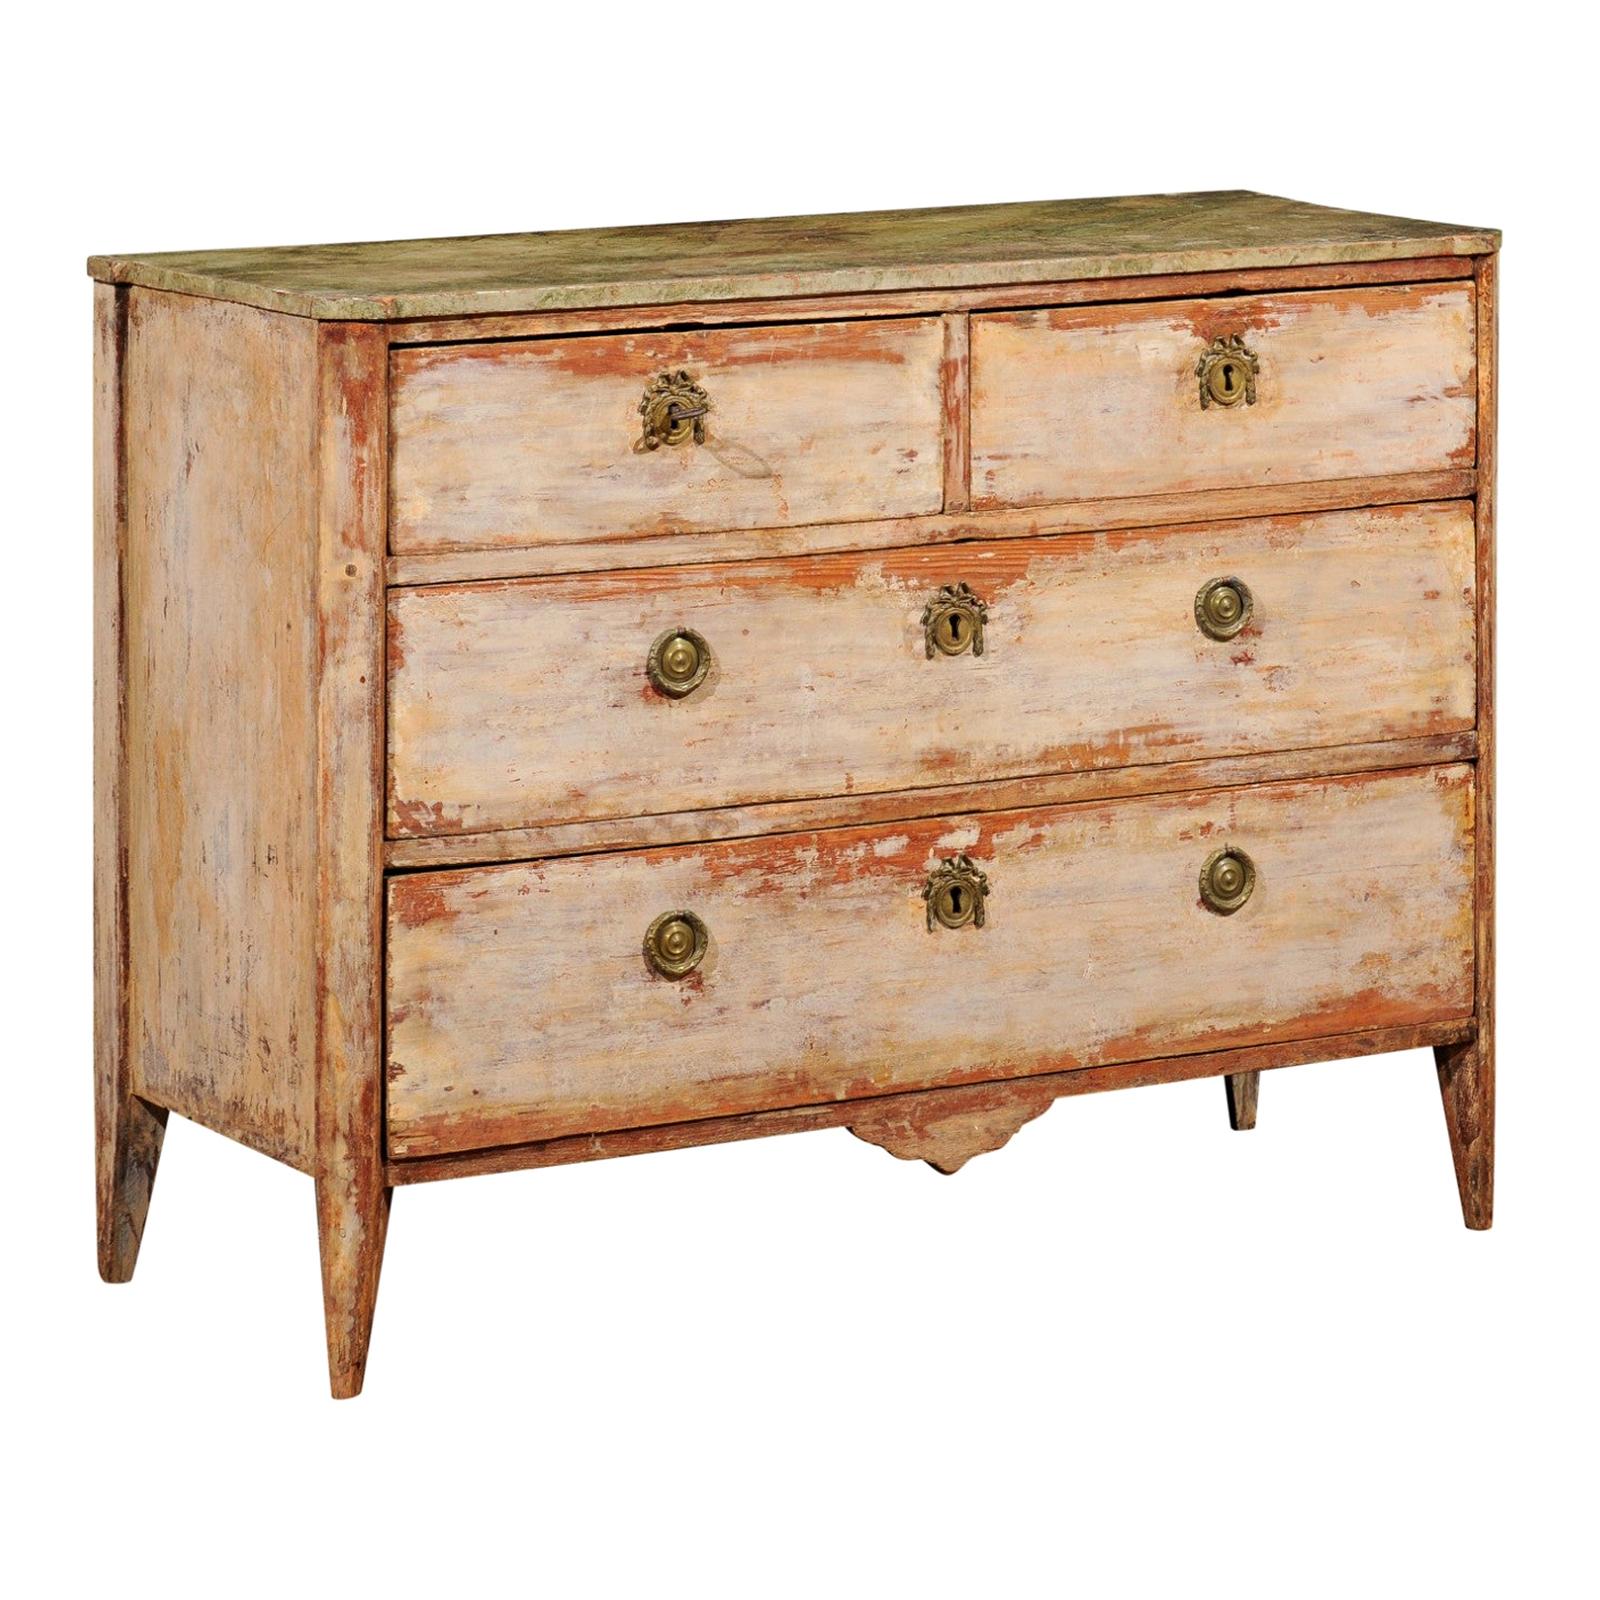 Swedish Late 18th Century Gustavian Four-Drawer Chest with Distressed Patina